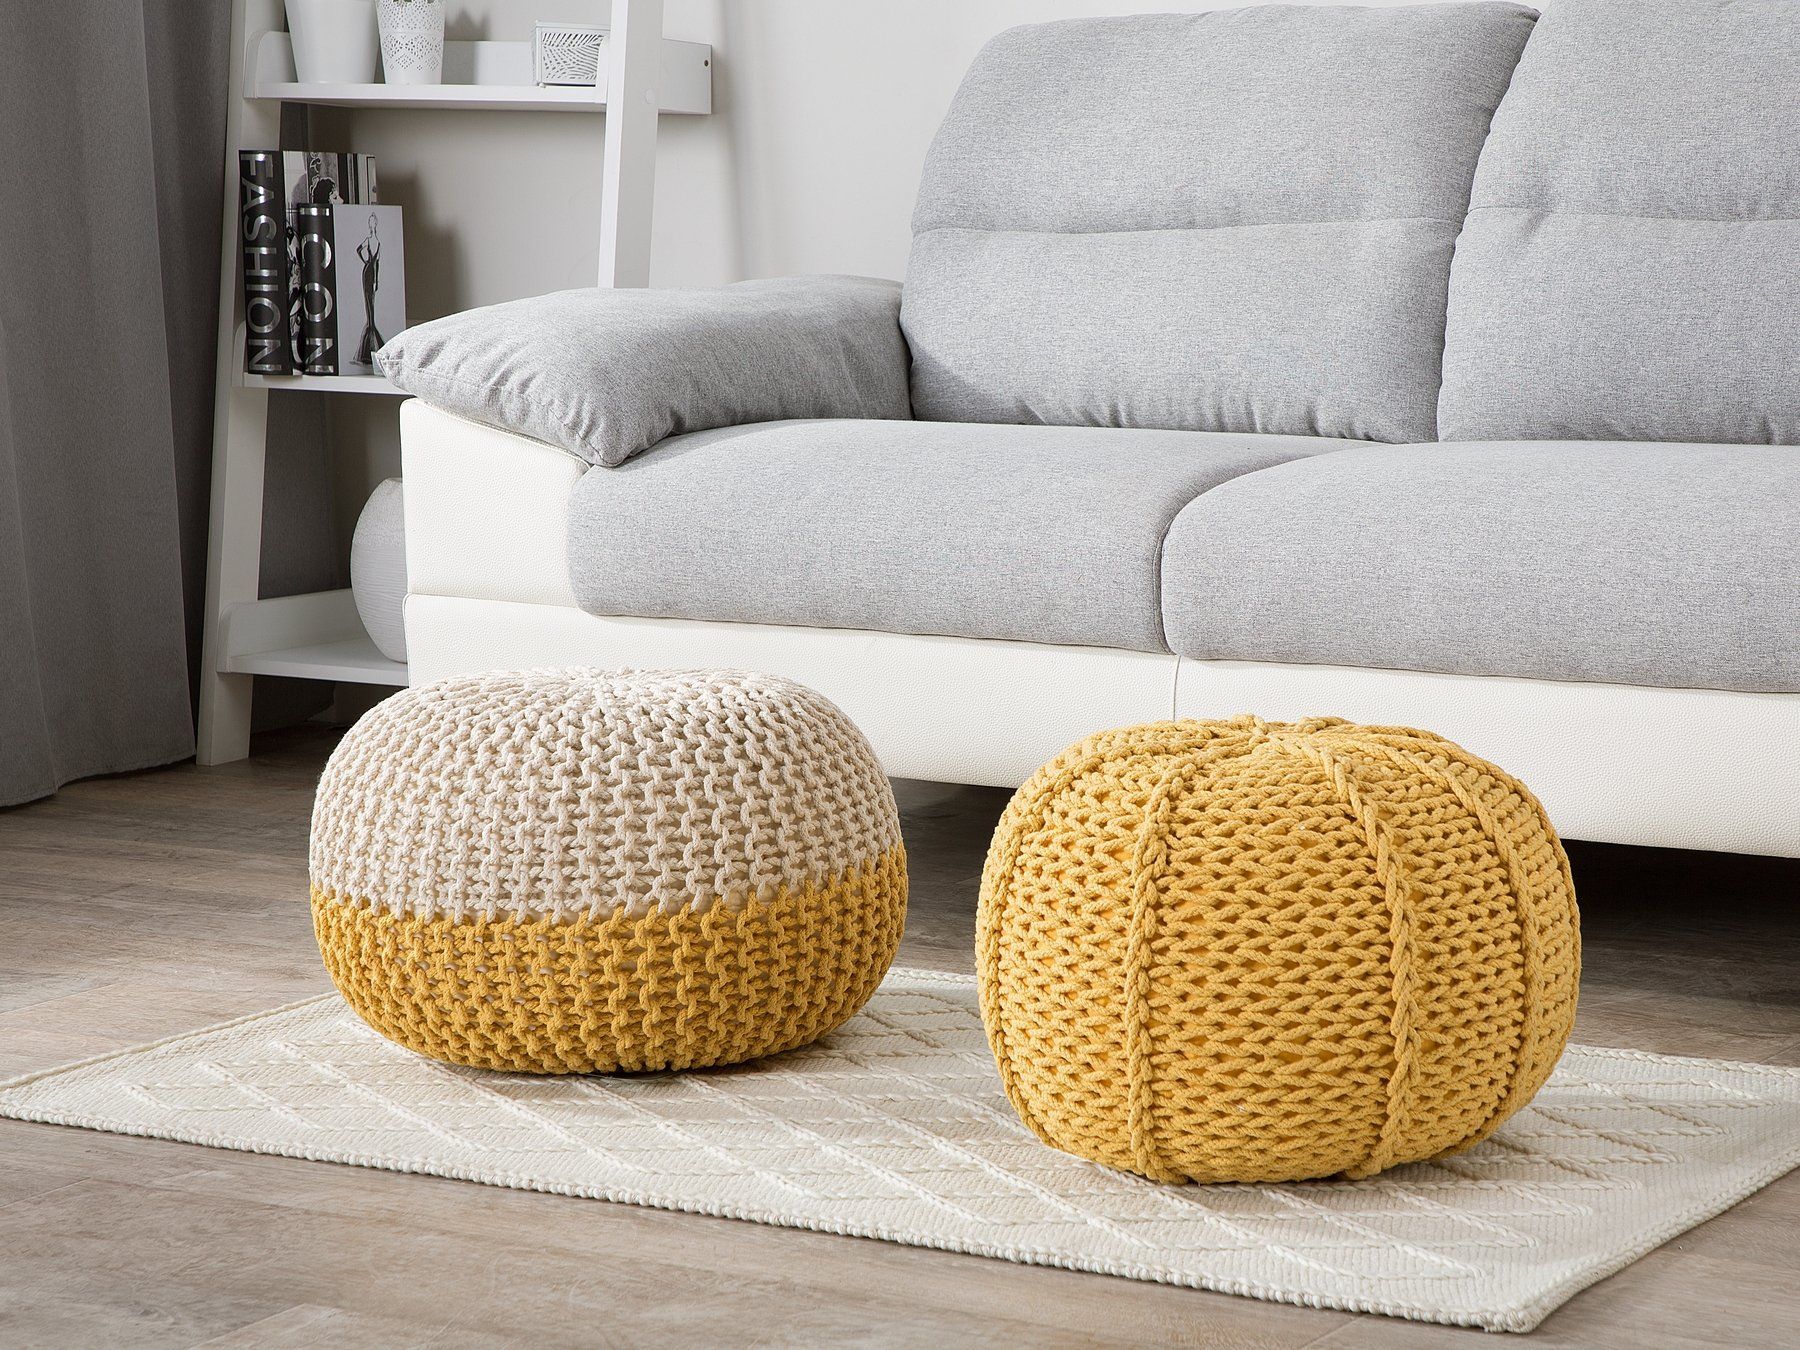 Pouffe Ottoman 50 X 35 Cm Beige And Yellow Conrad | Pouffe Ottoman Intended For Scandinavia Knit Tan Wool Cube Pouf Ottomans (Gallery 19 of 20)